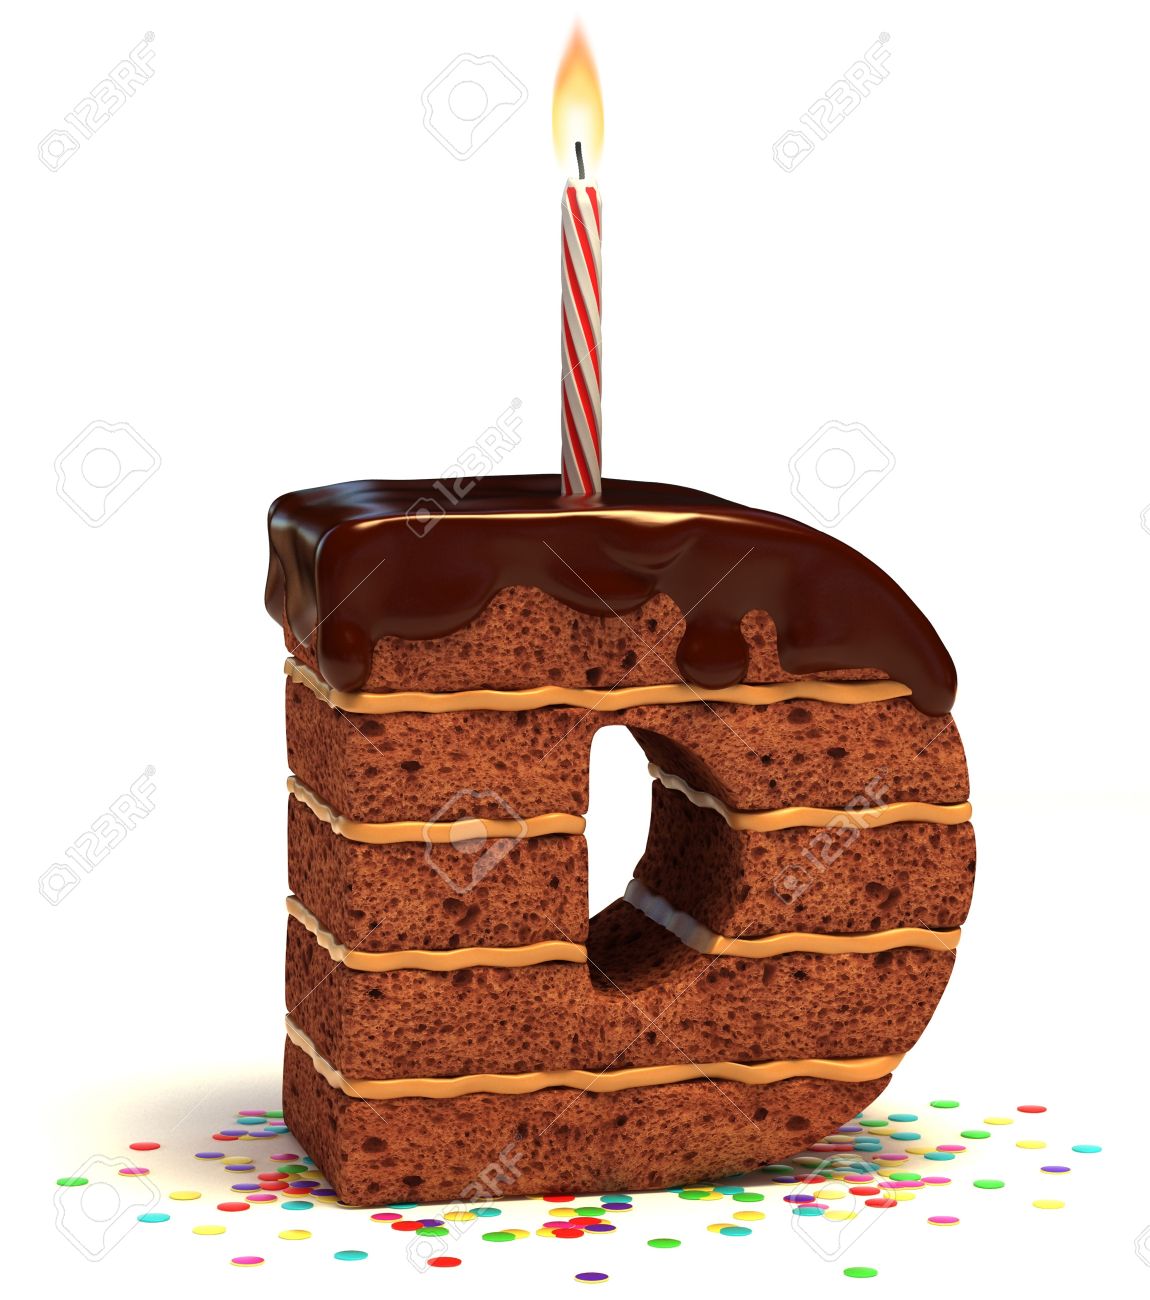 12331644-letter-D-shaped-chocolate-birthday-cake-with-lit-candle-and-confetti-isolated-over-white-background-Stock-Photo.jpg